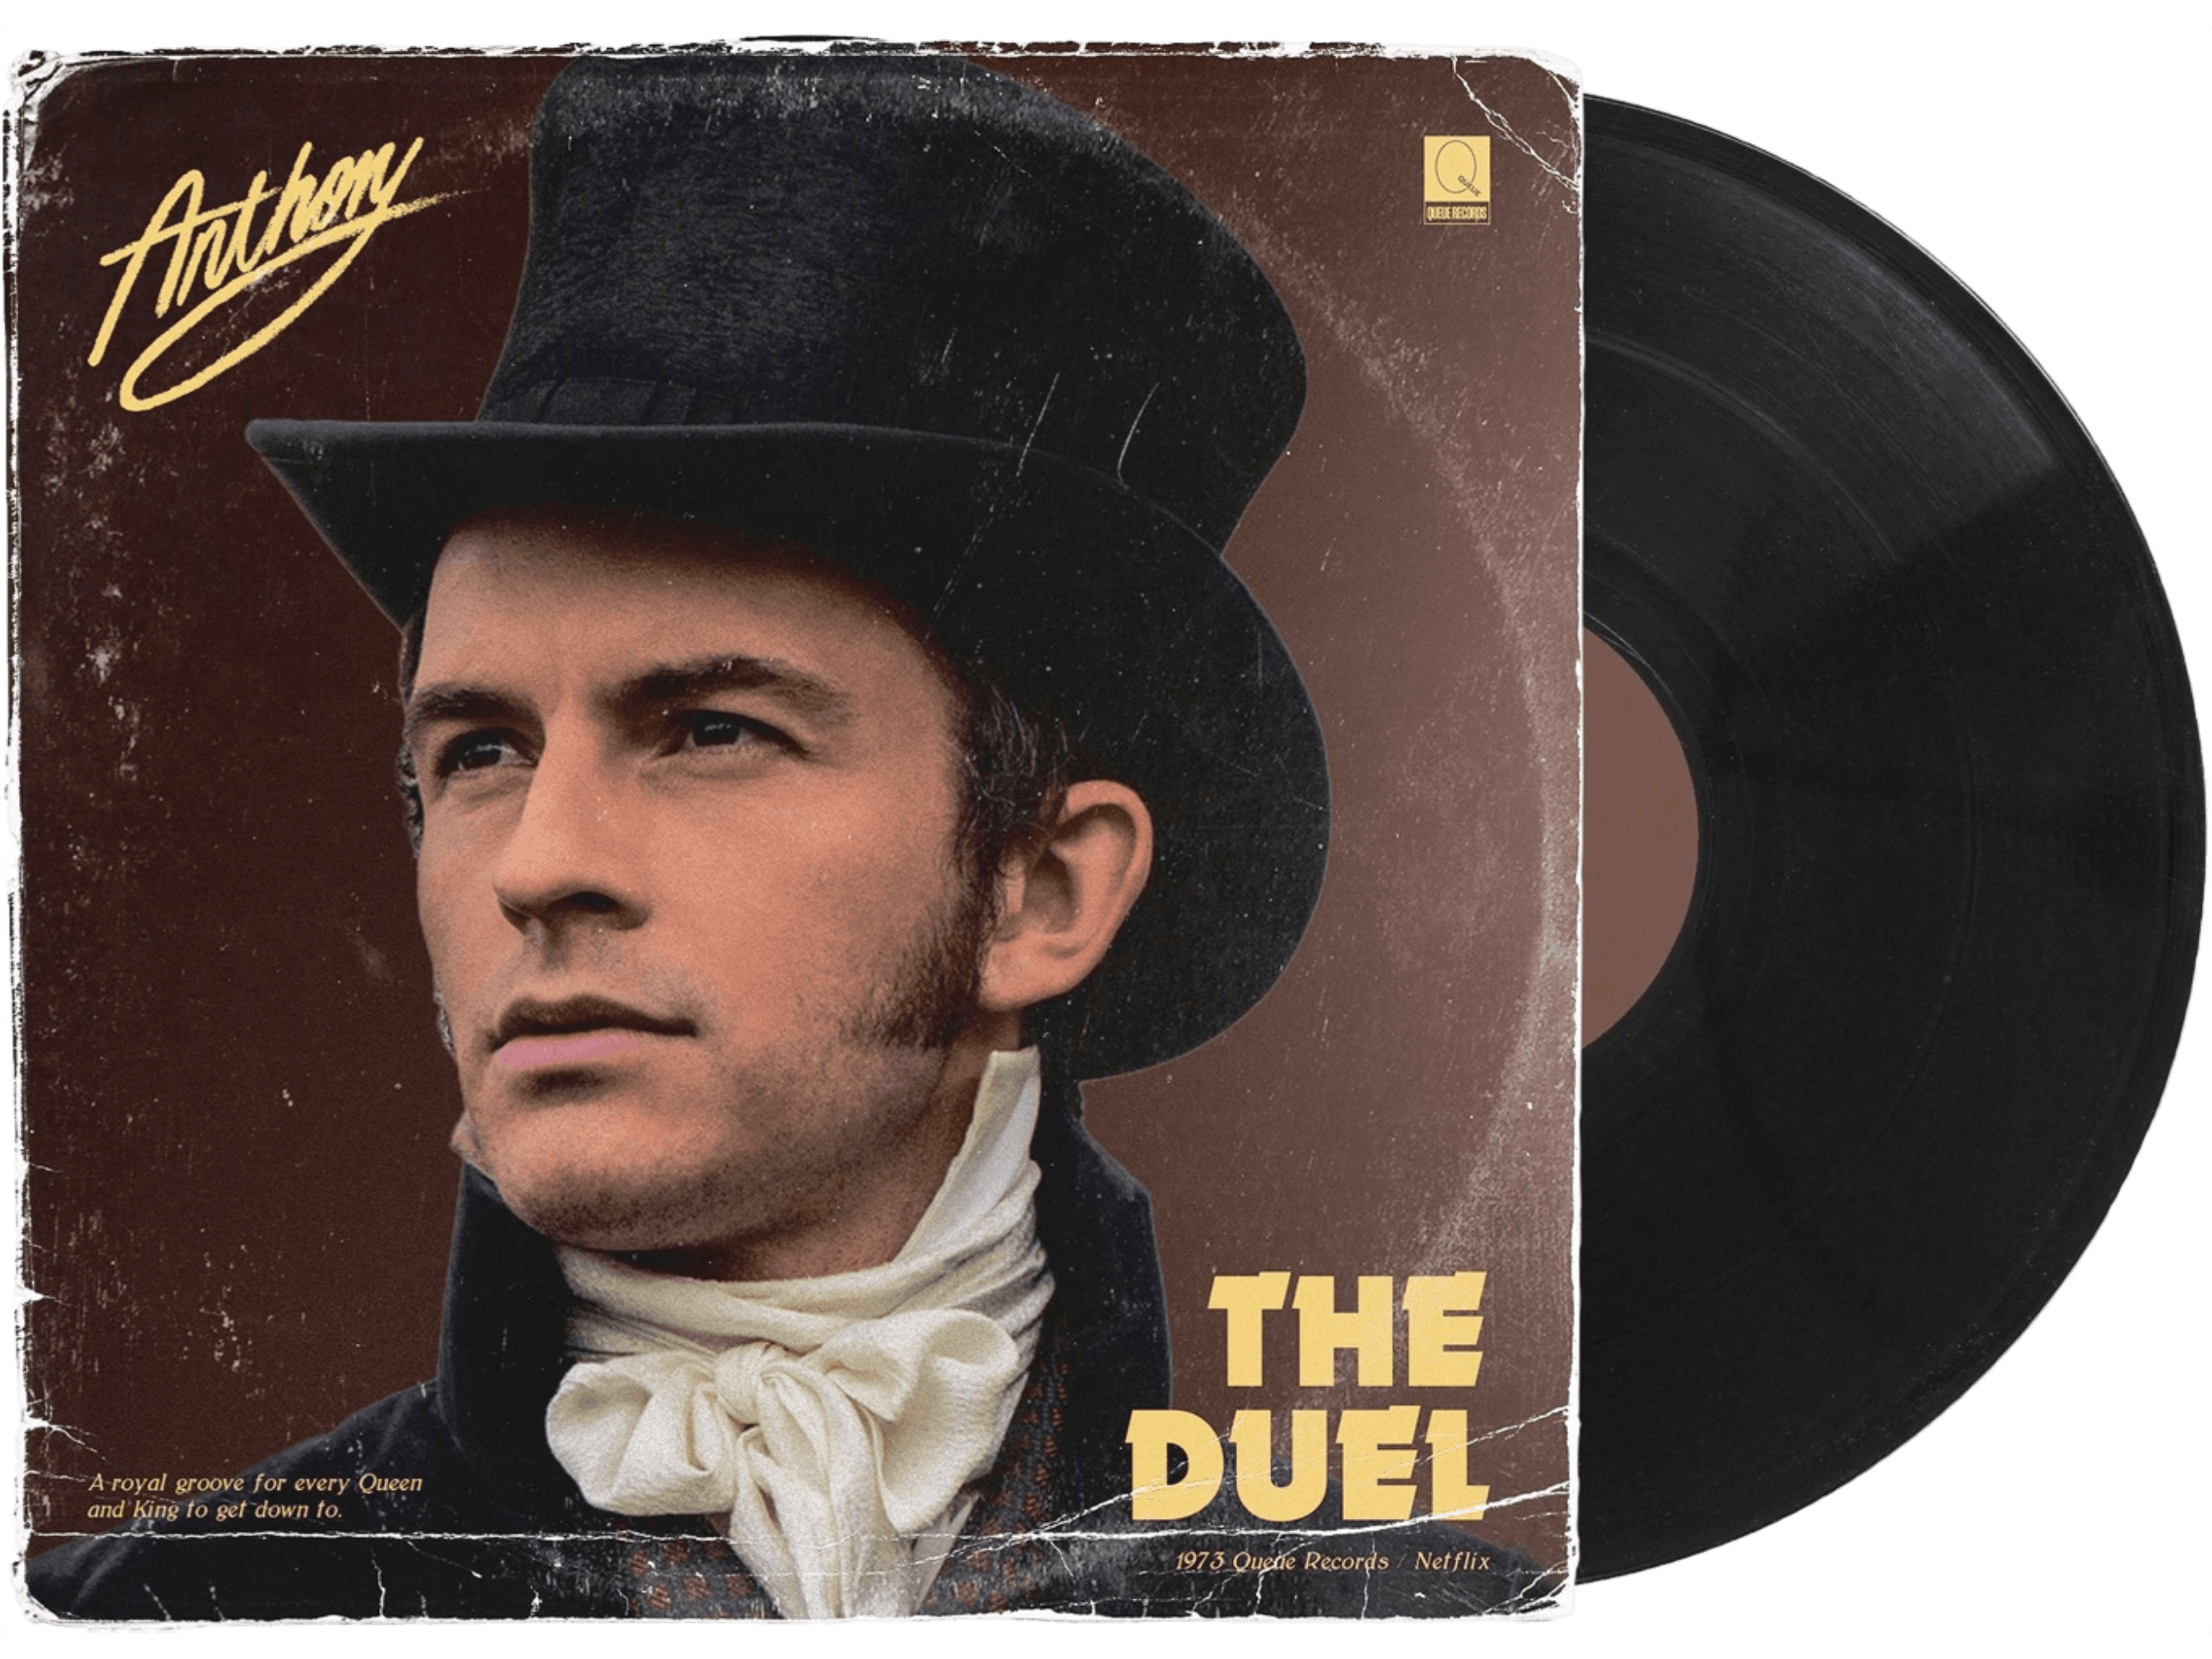 Anthony Bridgerton (Jonathan Bailey) on an album cover. In yellow writing, it reads “Anthony,” “A royal groove for every Queen and King to get down to,” “1973 Queue records Netflix,” and “The Duel.” He wears his signature look of black top hat, white shirt, and black jacket.